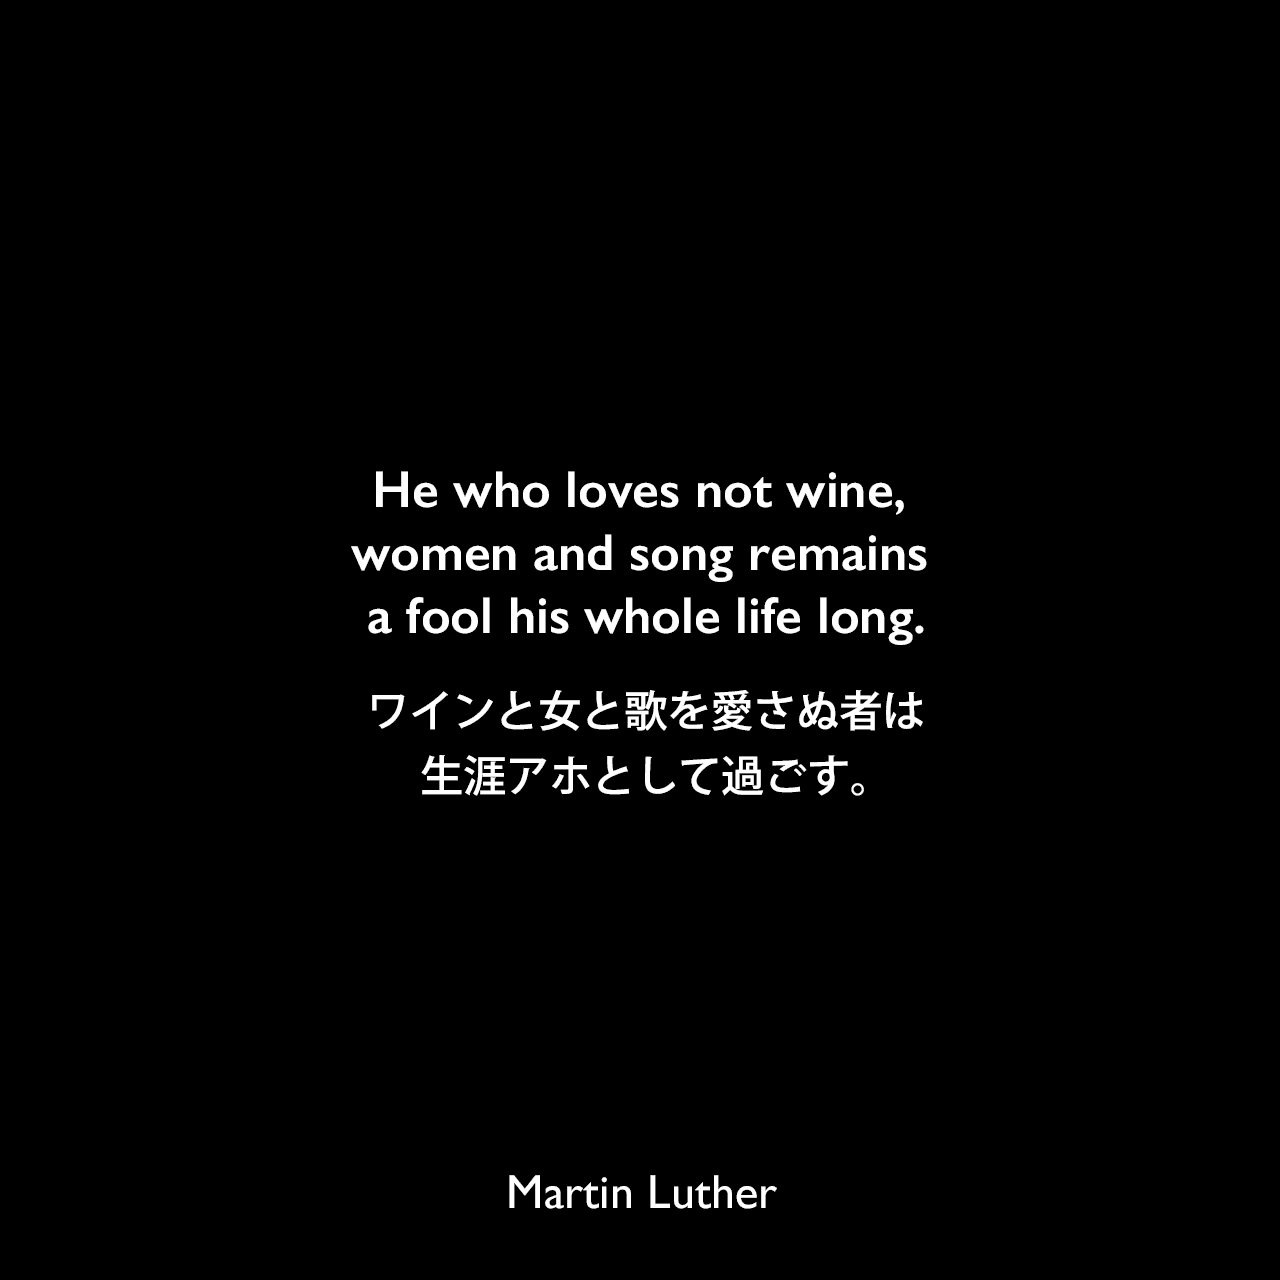 He who loves not wine, women and song remains a fool his whole life long.ワインと女と歌を愛さぬ者は、生涯アホとして過ごす。Martin Luther